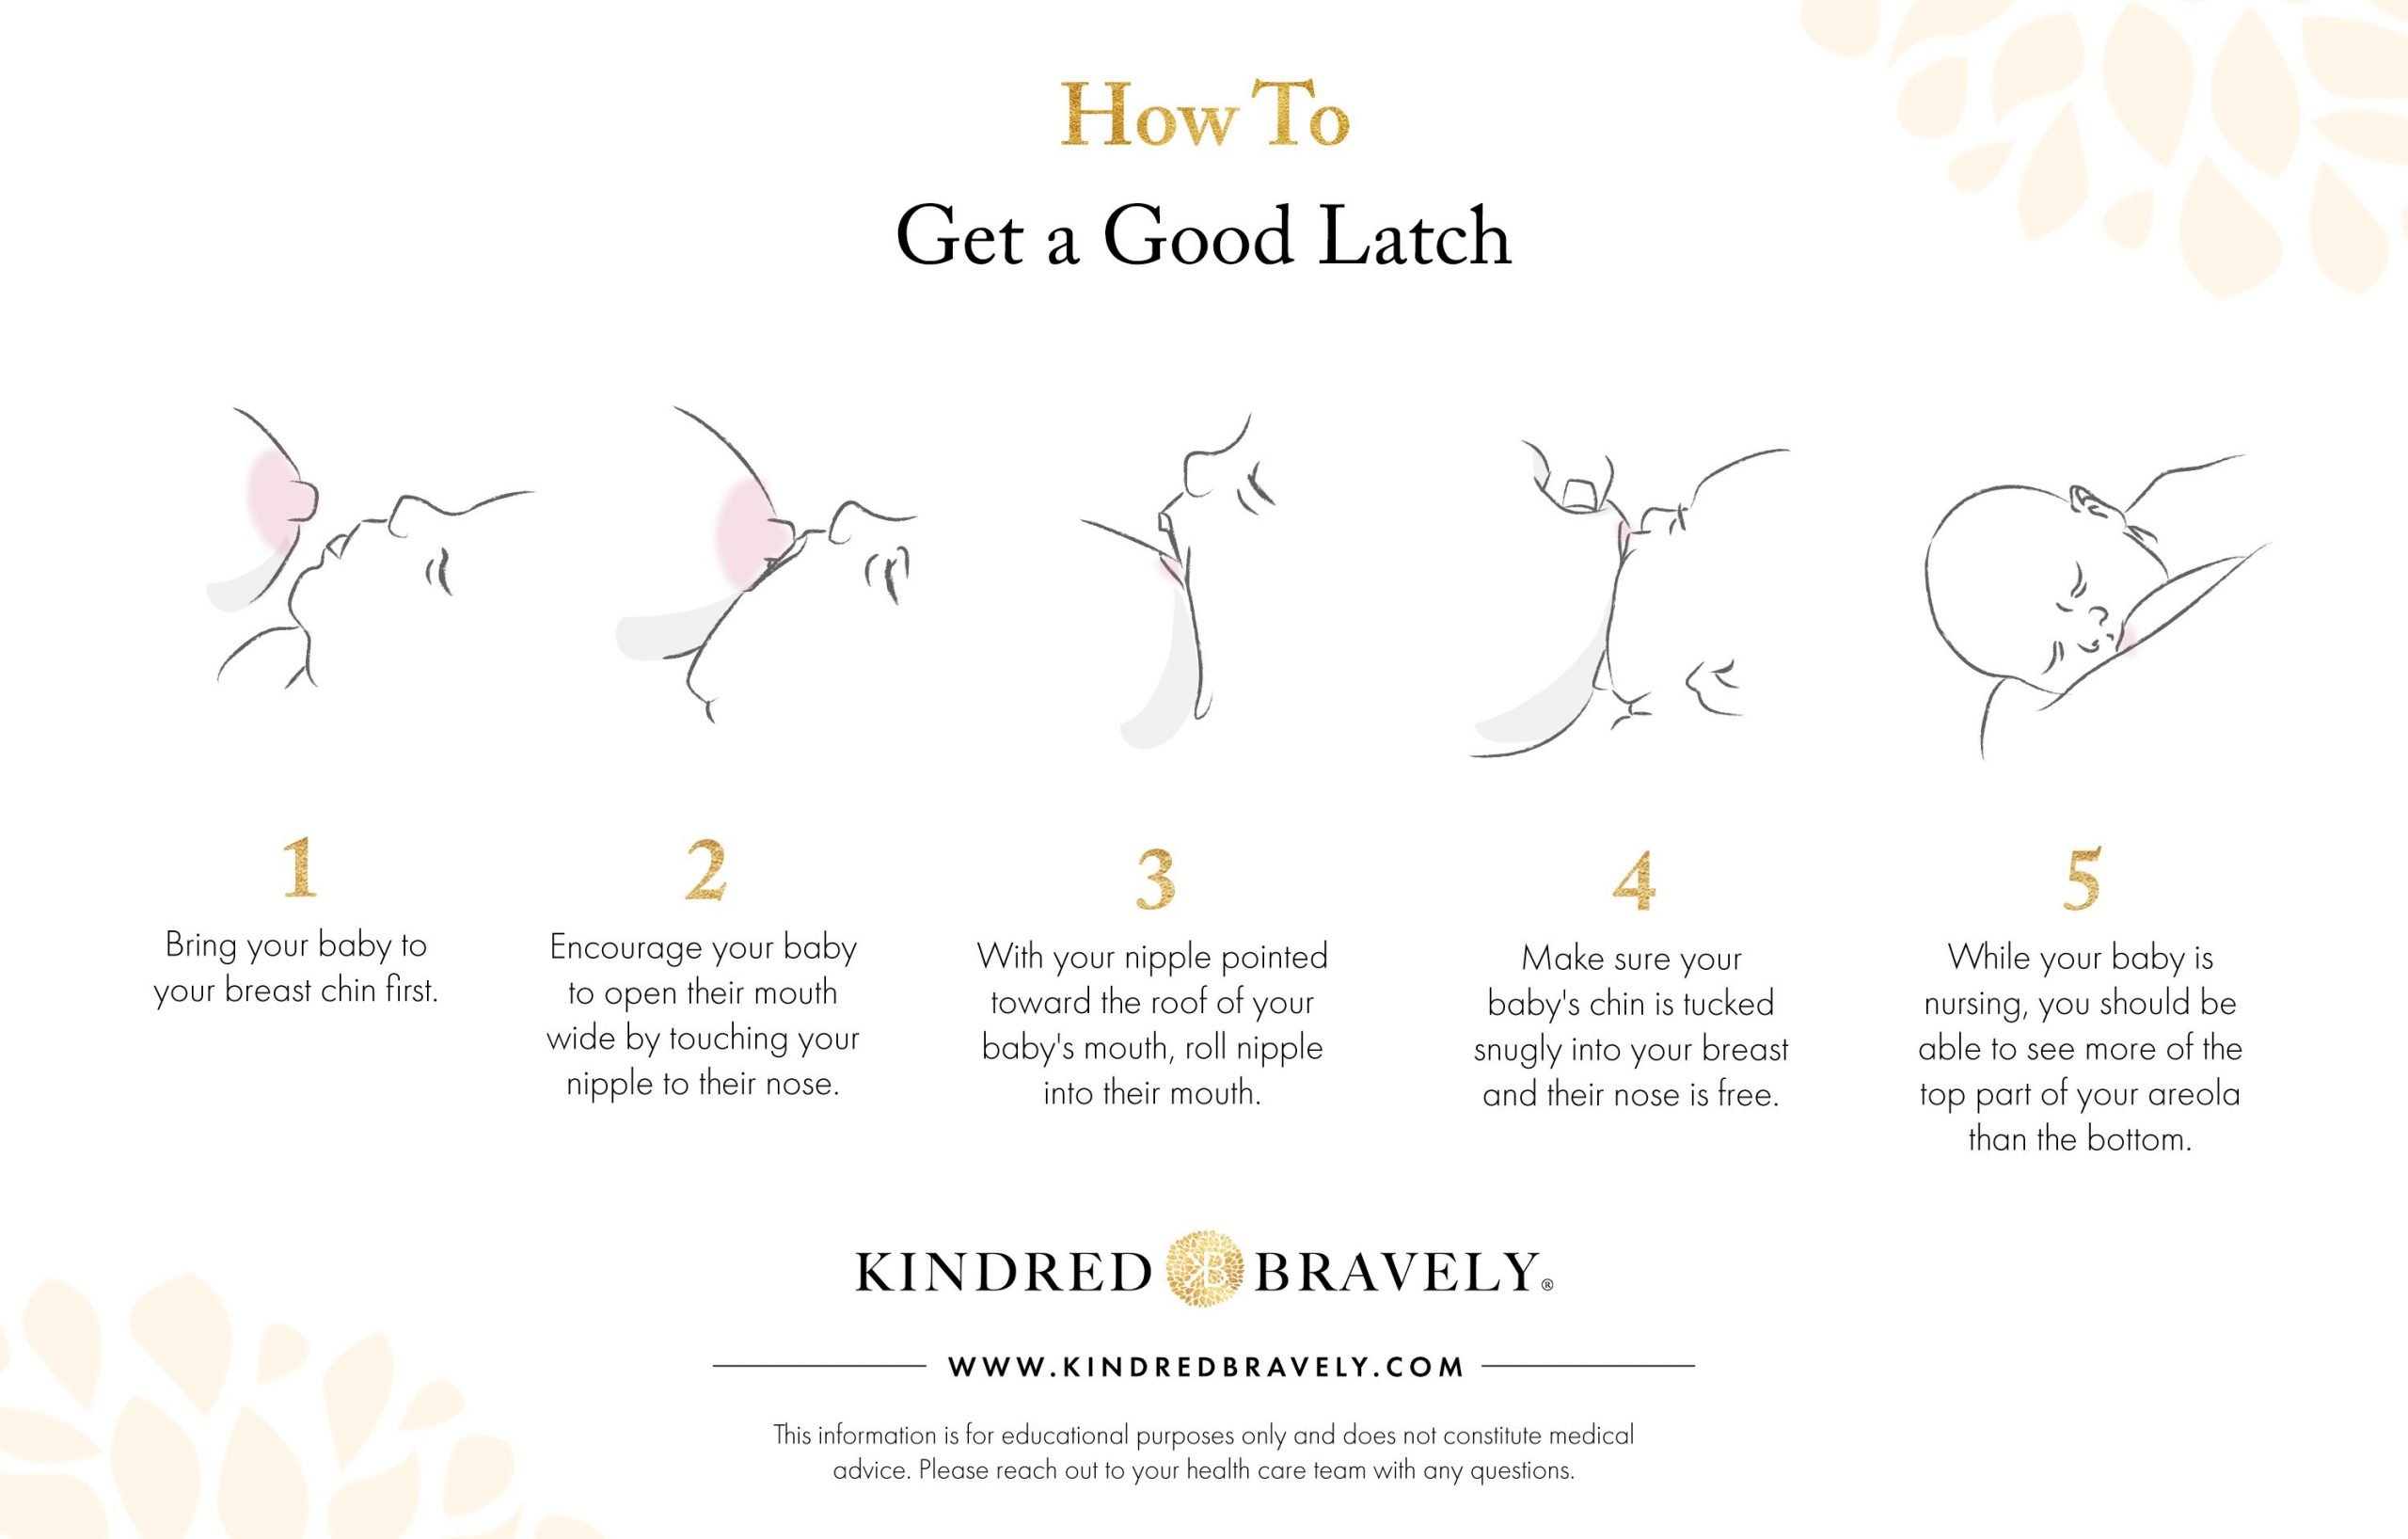 10 Tips for Breastfeeding a Newborn Baby Kindred Bravely